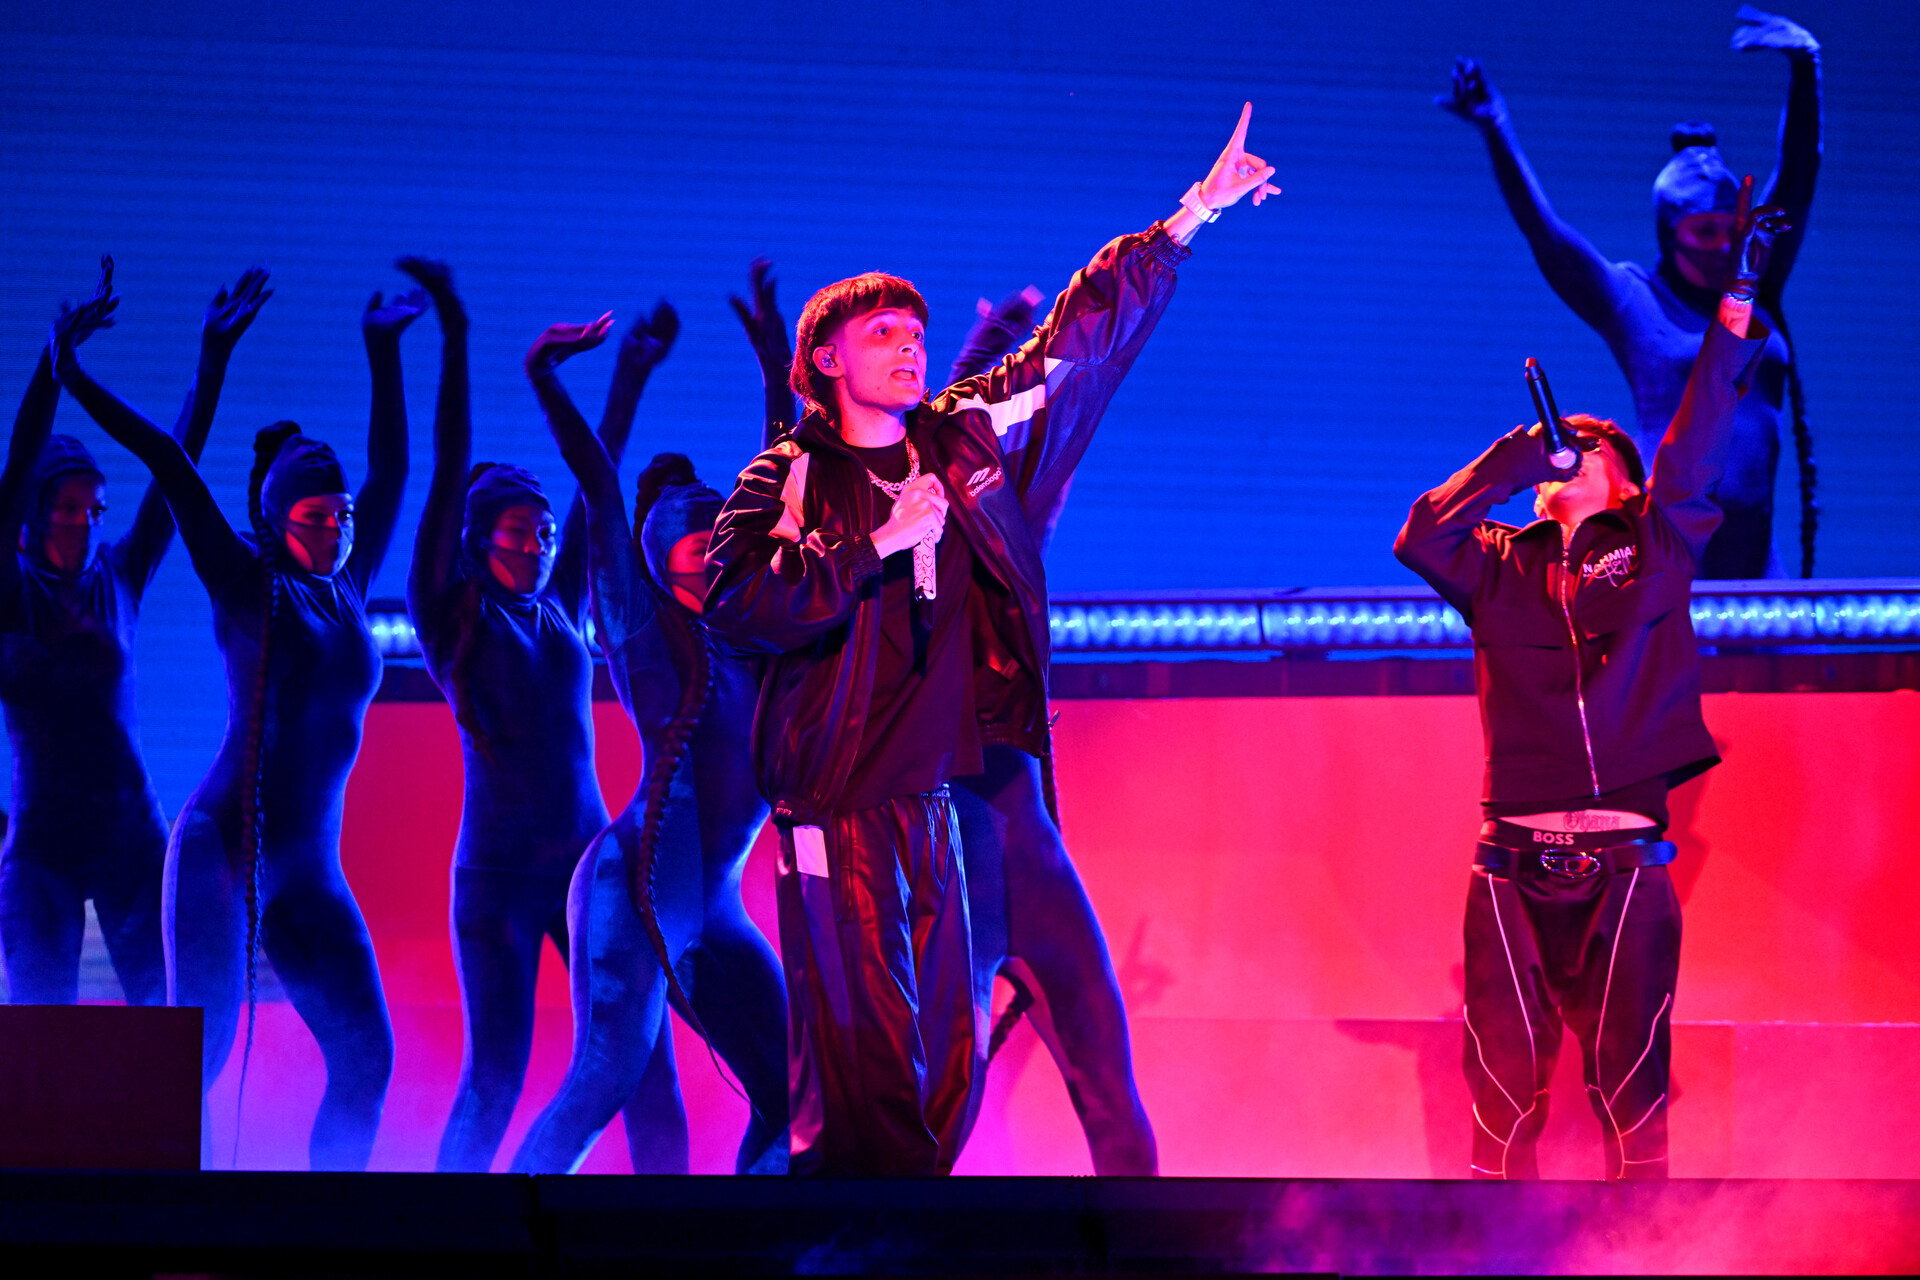 A group of people perform on a blue and red toned stage, with red lighting cast on their faces and bodies, holding their arms in the air. Two men at the front hold microphones.